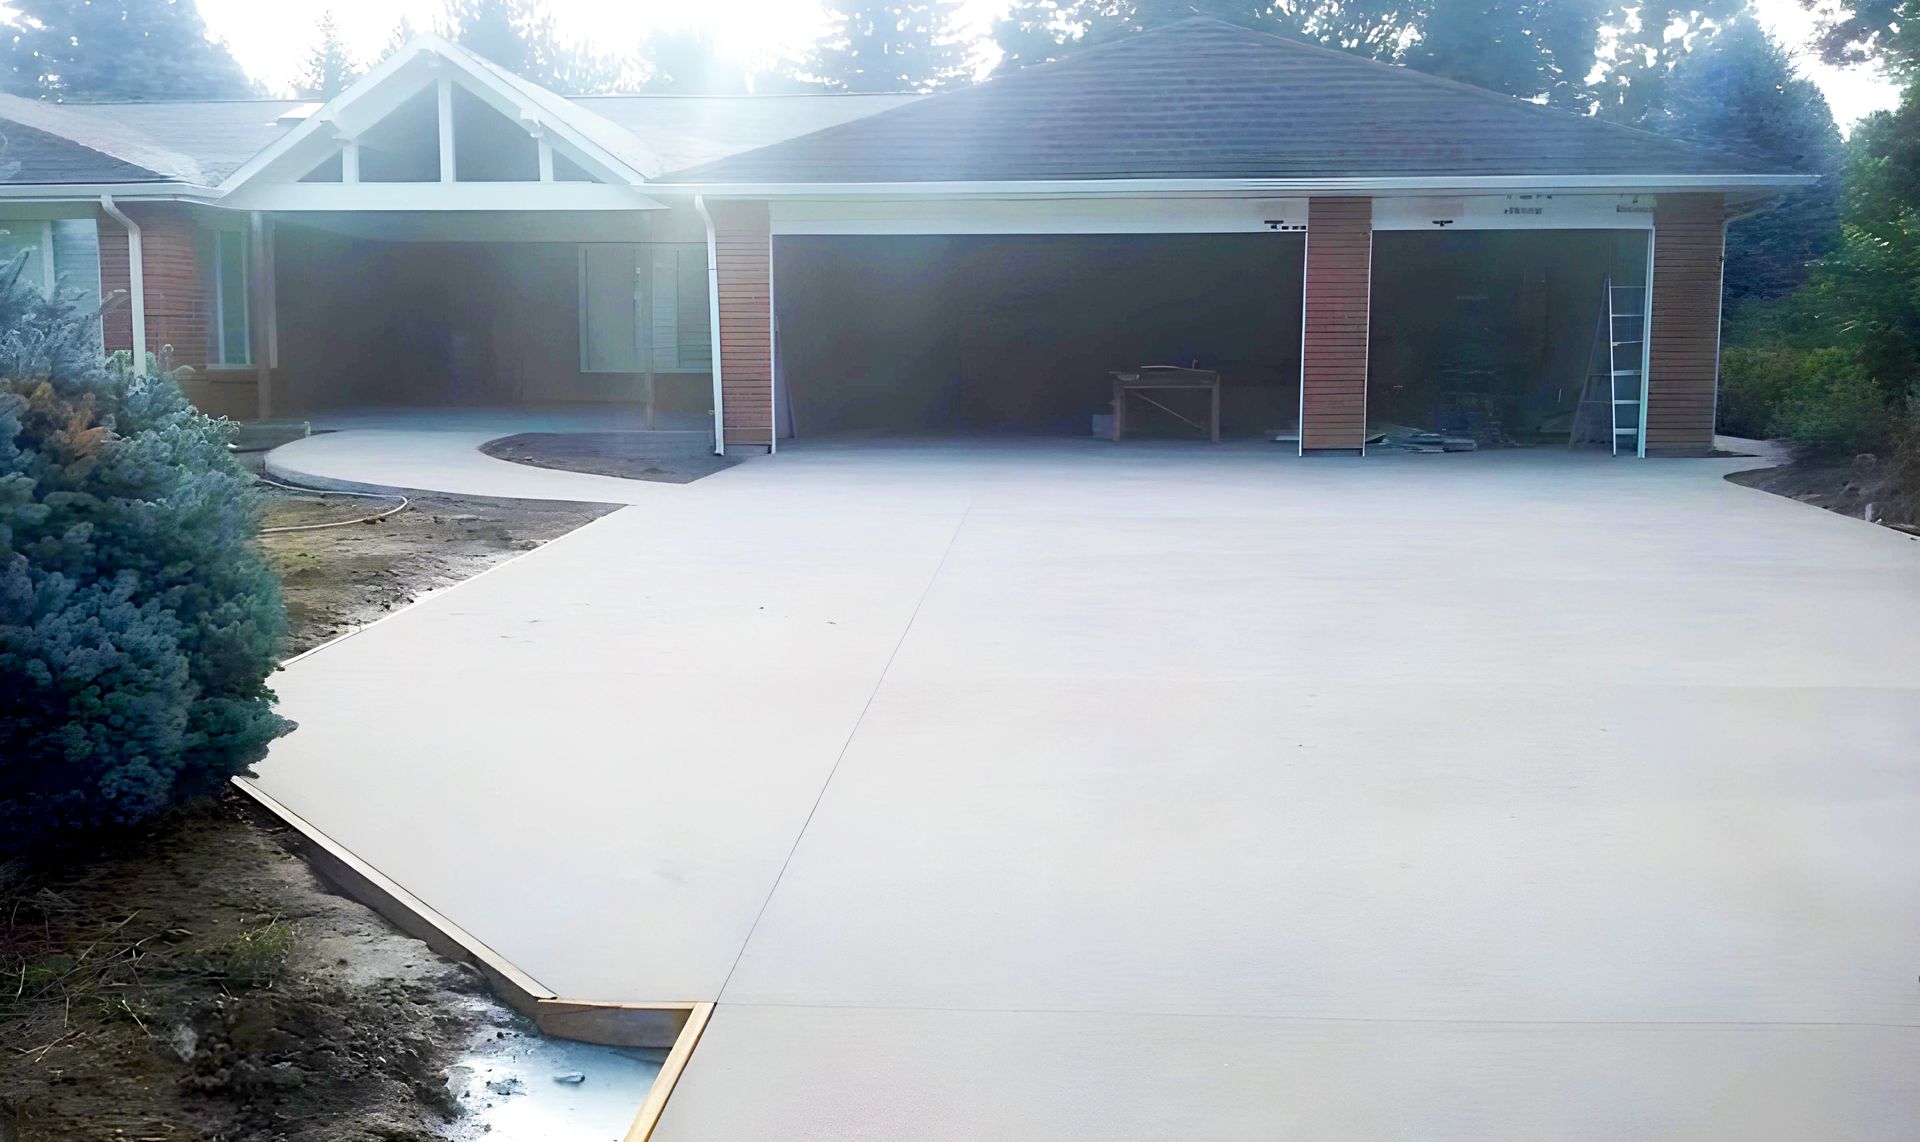 A brick house with a concrete driveway in front of it.